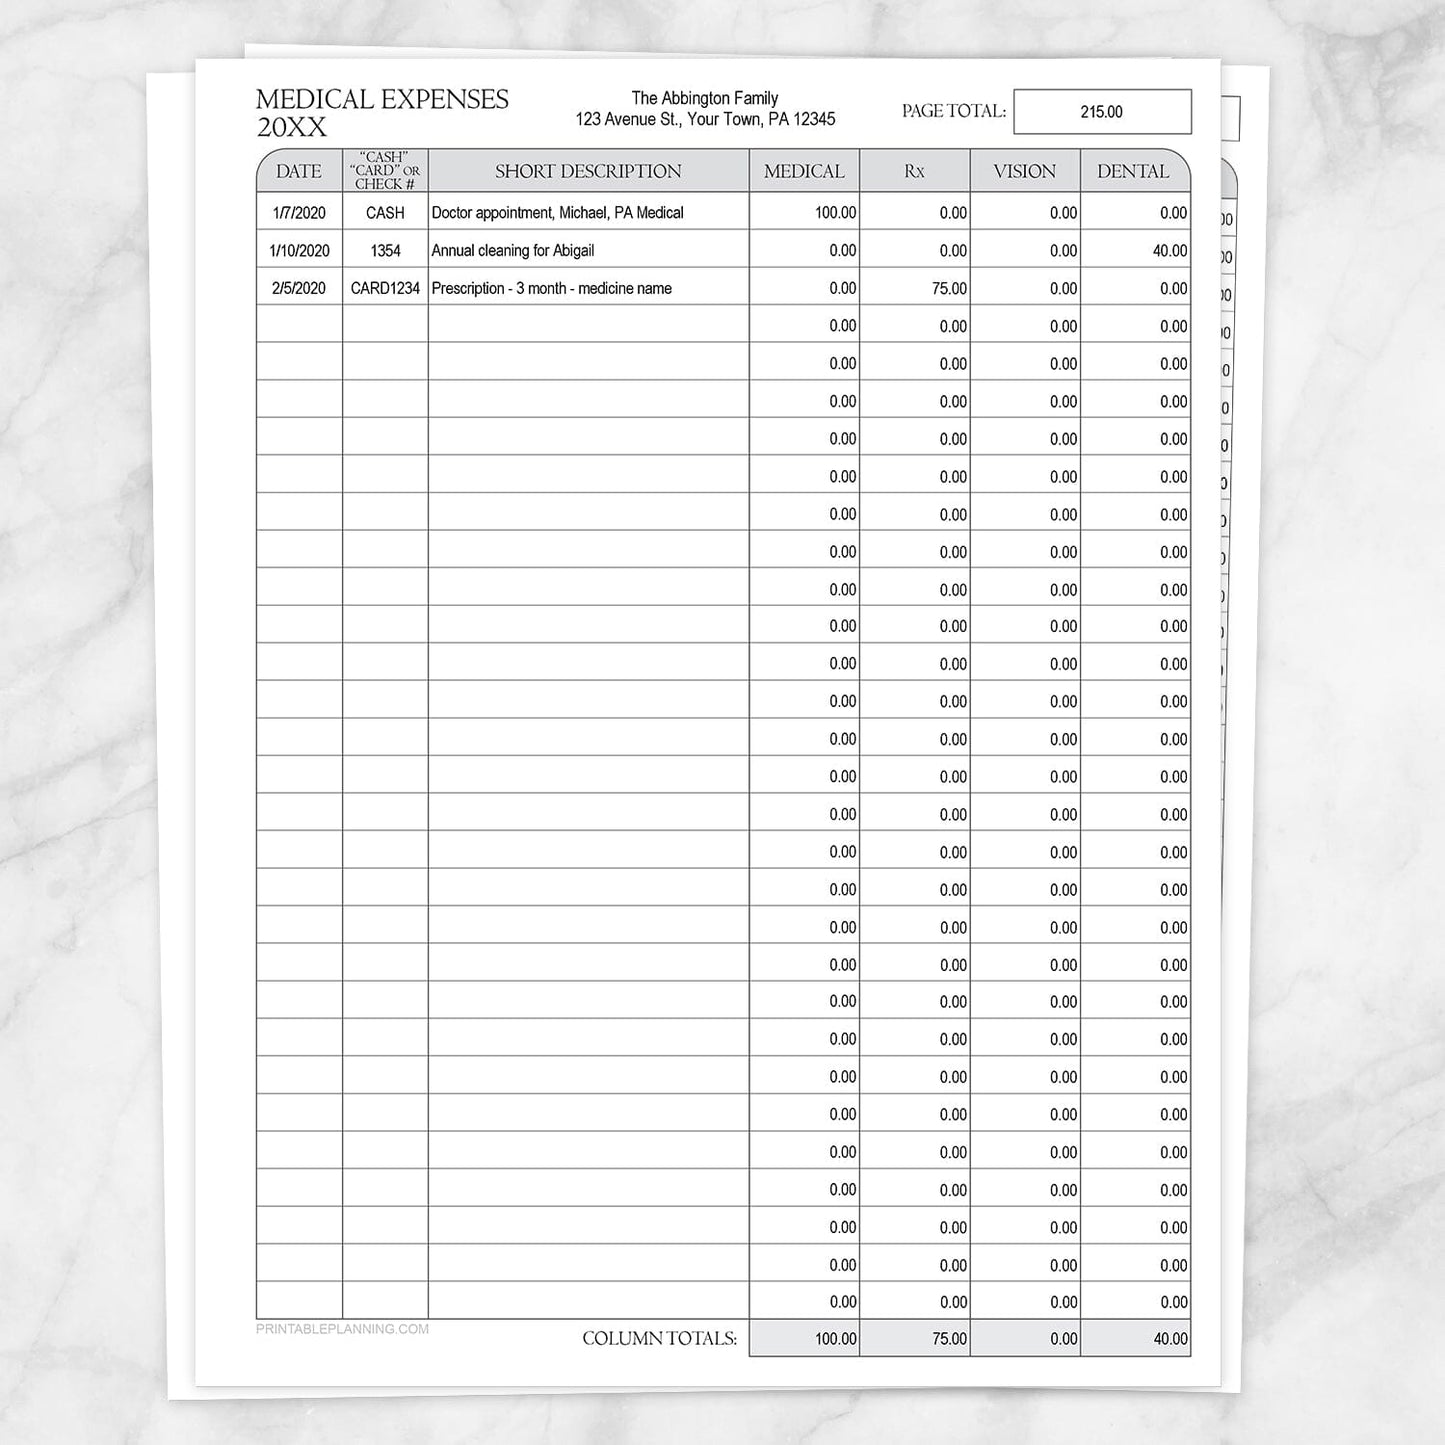 Printable Medical Expenses with Auto-Calculating Totals at Printable Planning.